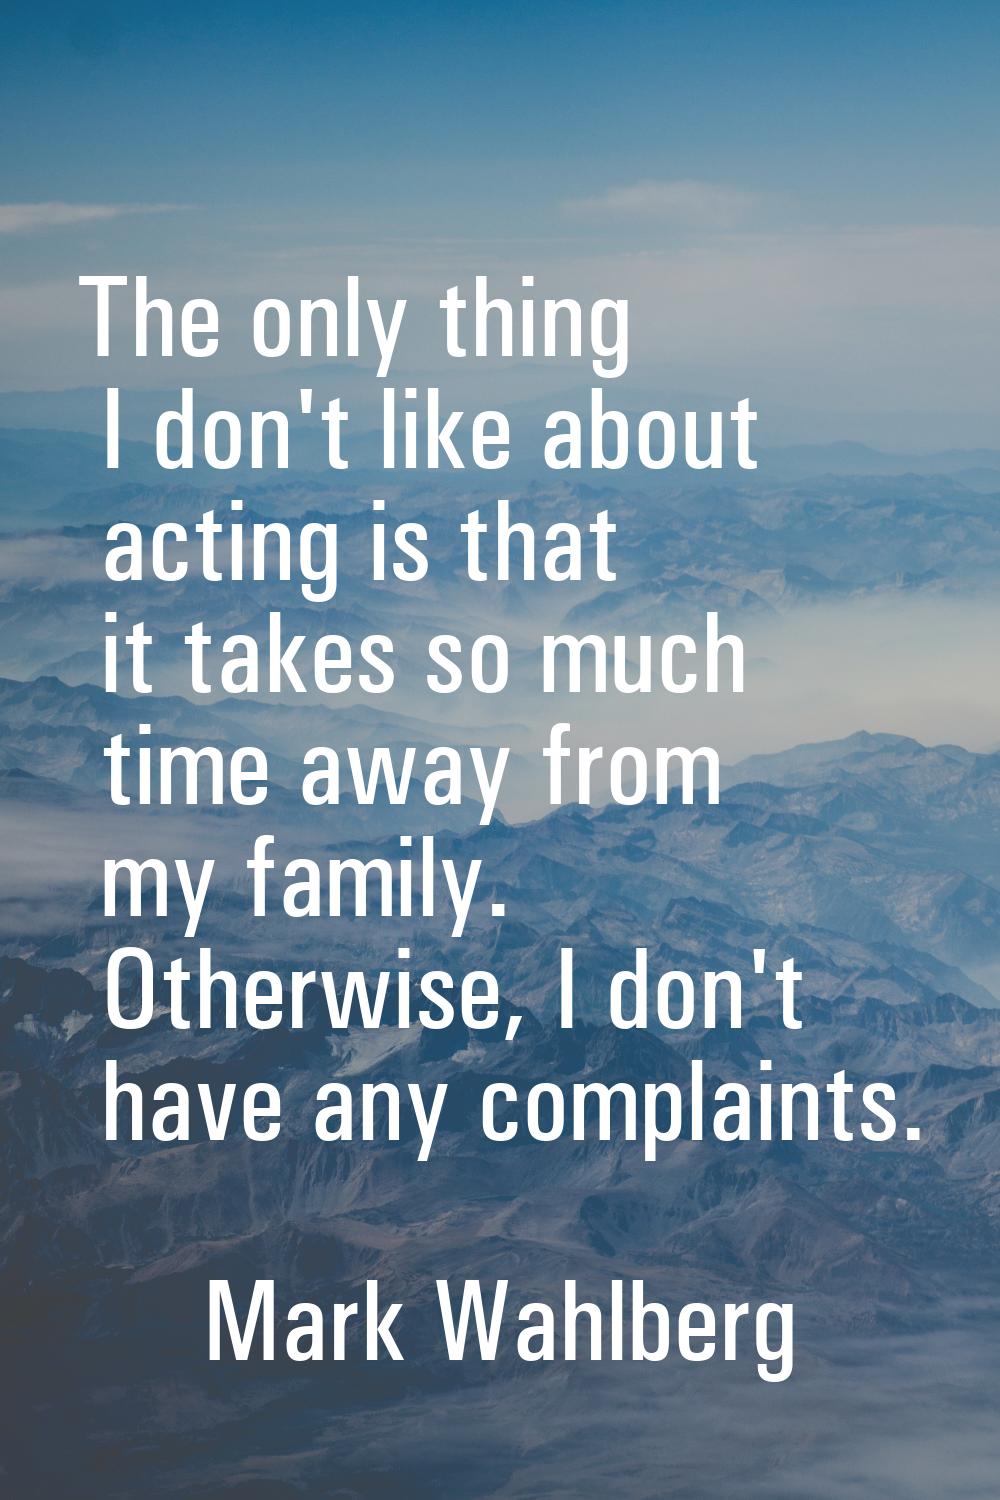 The only thing I don't like about acting is that it takes so much time away from my family. Otherwi